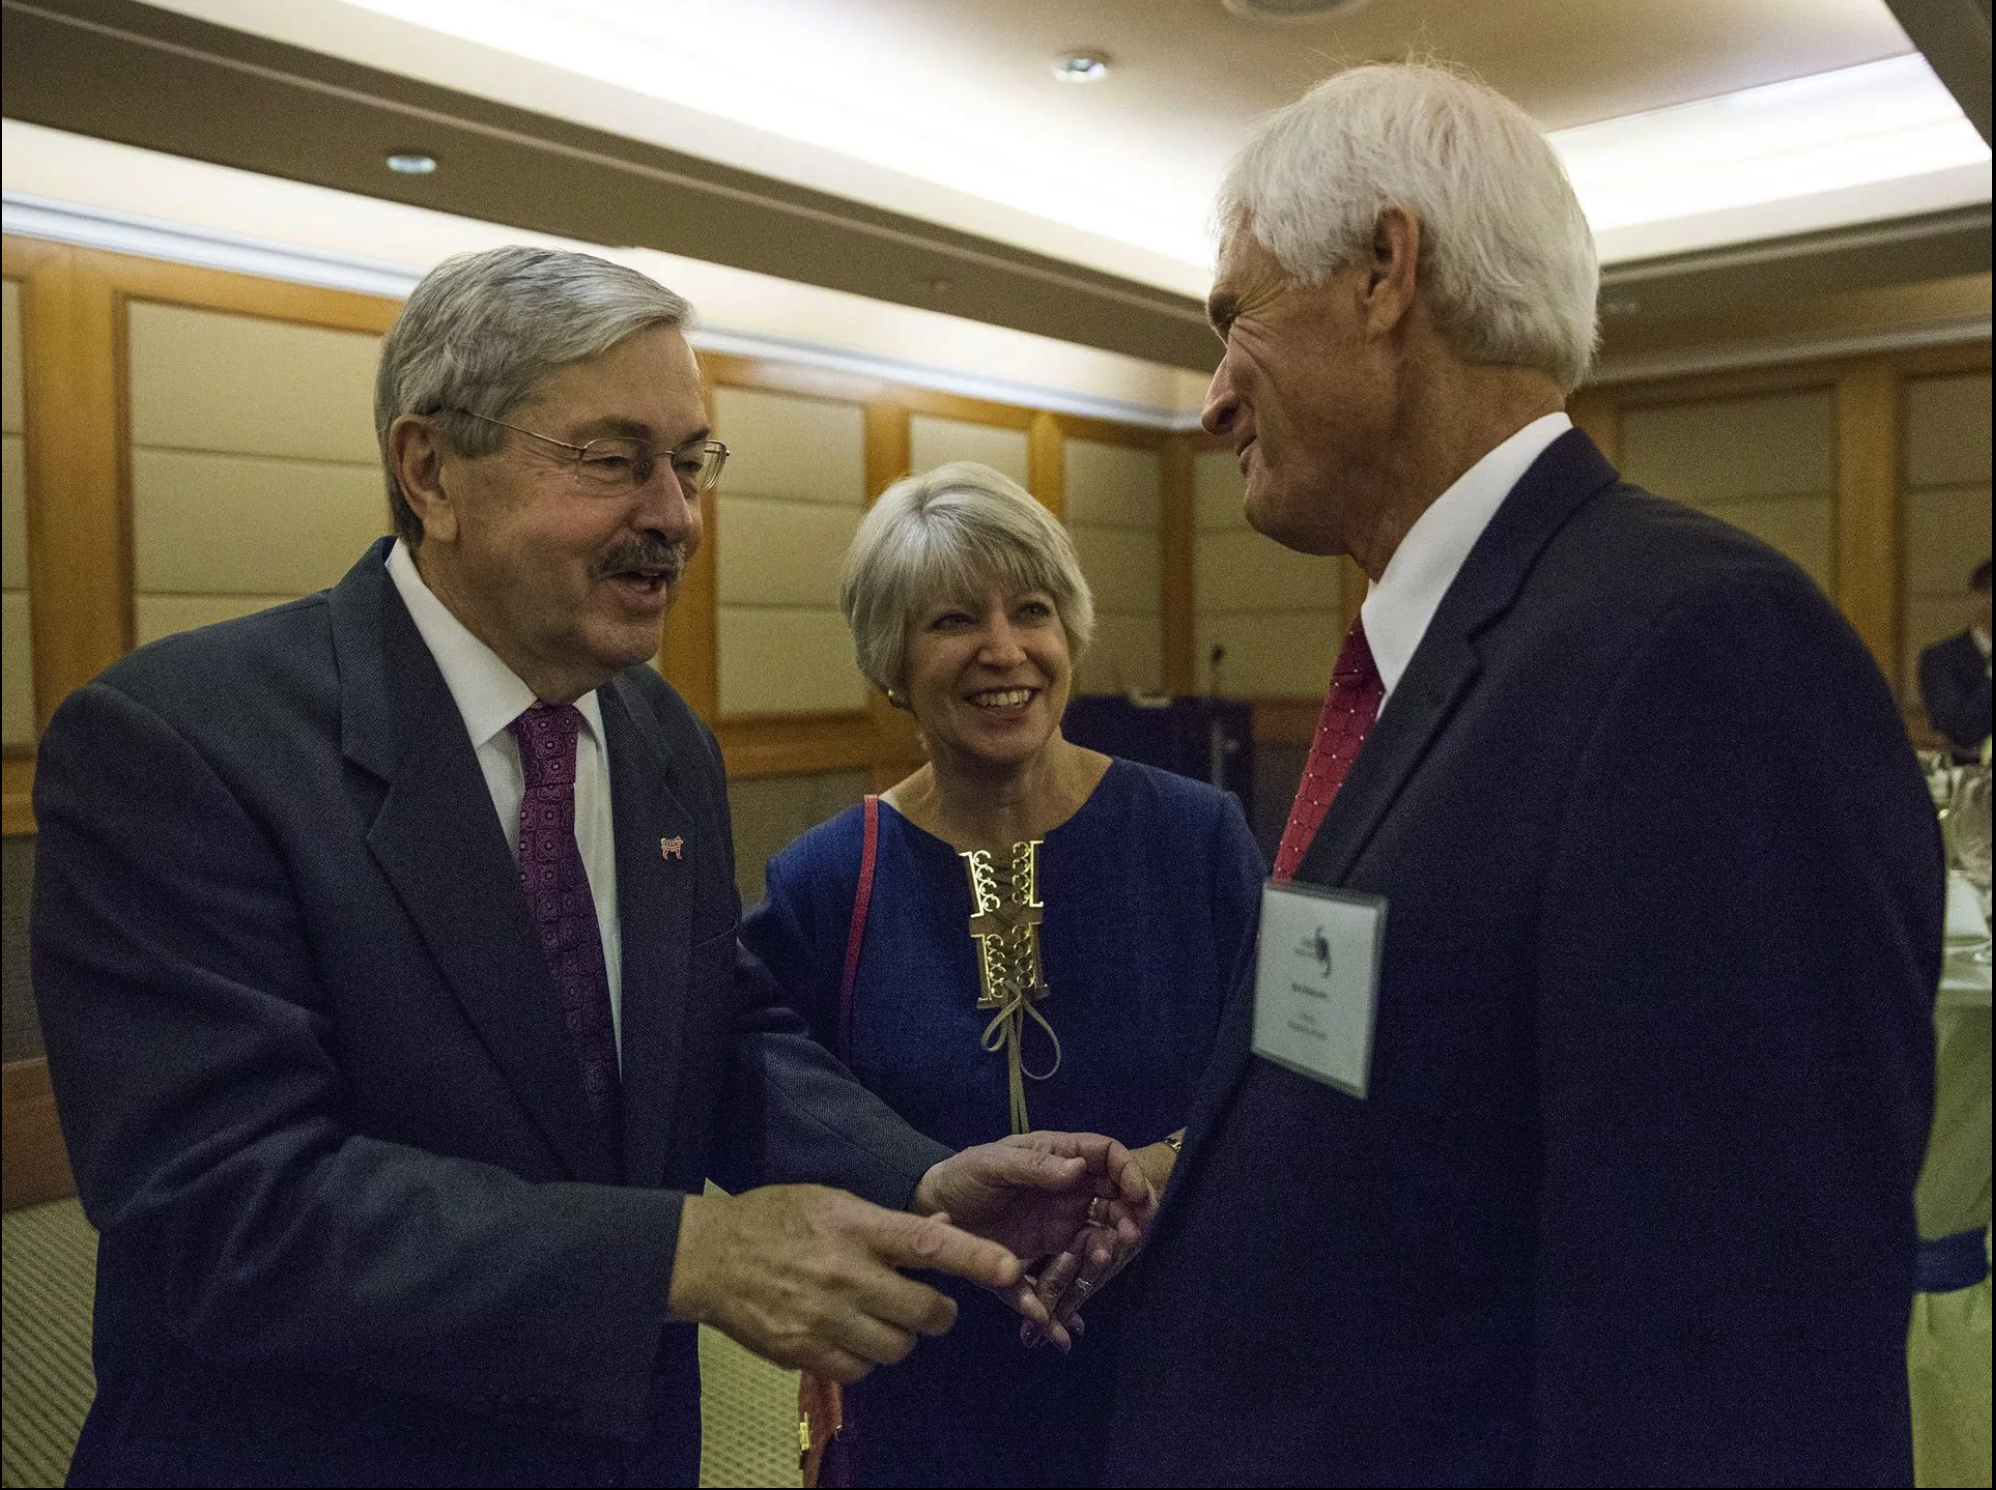 Terry Branstad, U.S. ambassador to China, and his wife, Chris Branstad say hello to Rick Kimberley, a corn and soy bean farmer from Iowa, during an Iowa Sister States reception on Wednesday, Sept. 20, 2017, in Beijing, China. A groundbreaking will be held this weekend for a replica of Kimberley's family farm being built in China. Image by Kelsey Kremer. China, 2017.